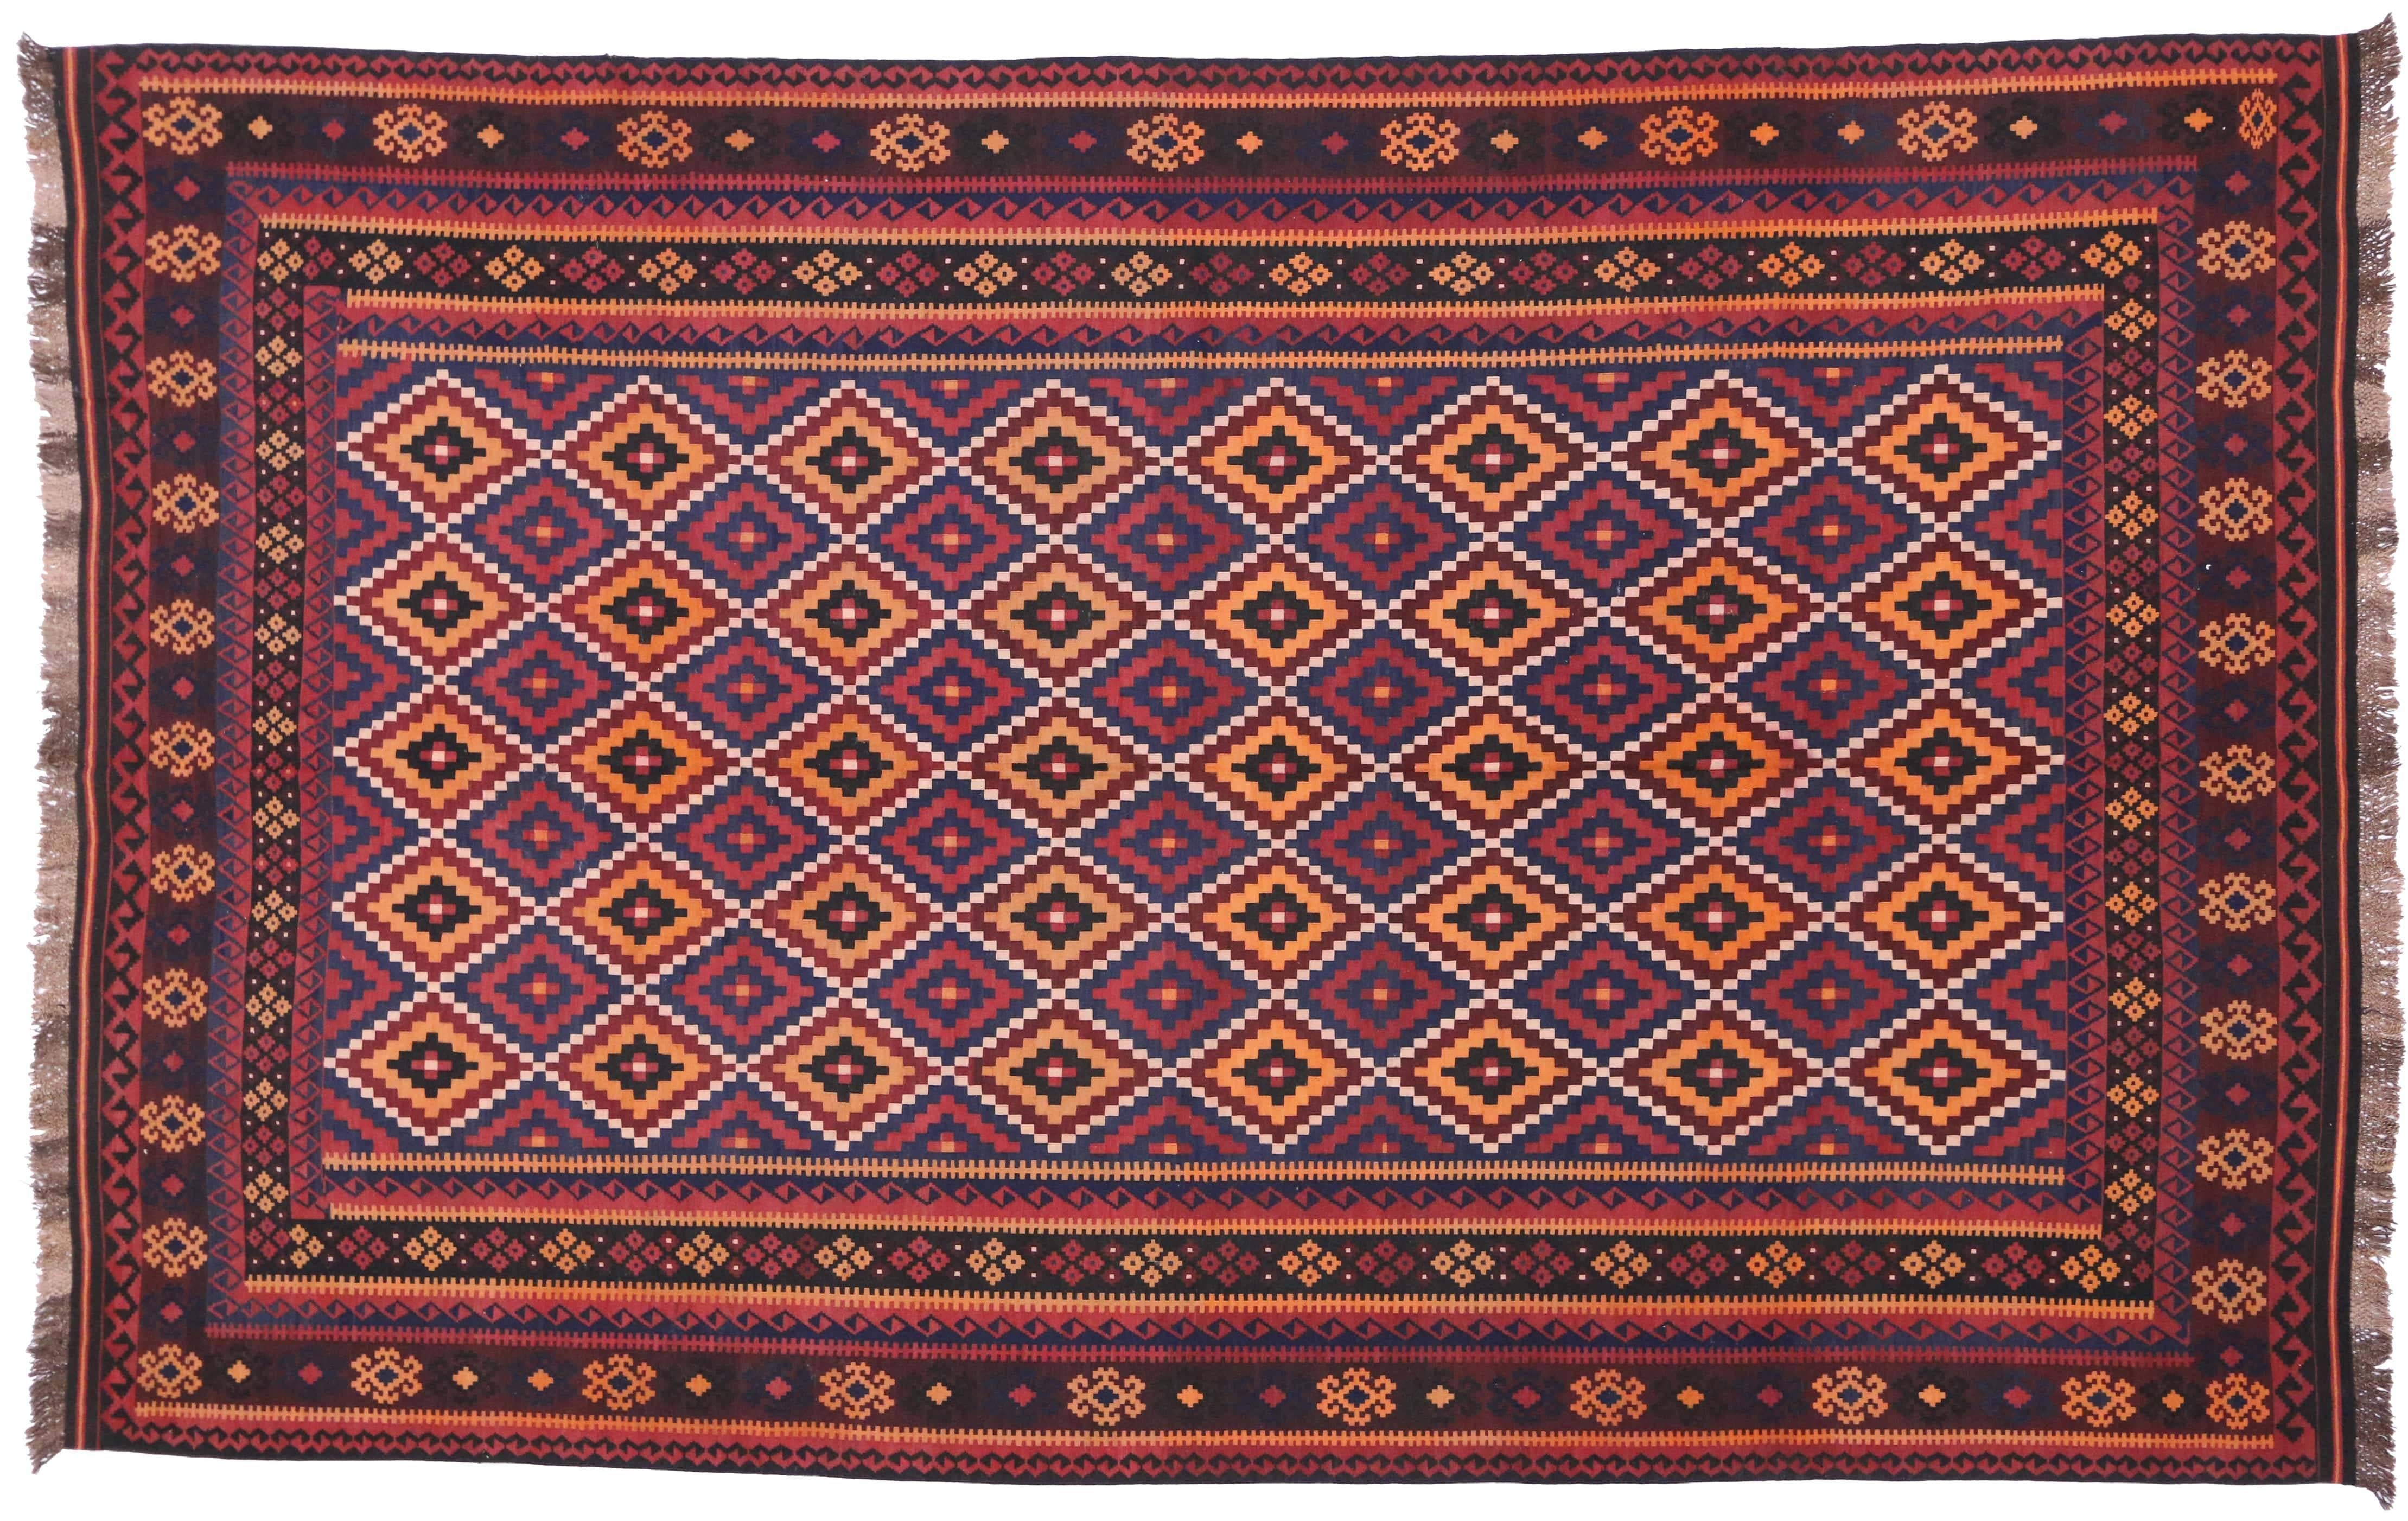 74276, vintage Afghan Kilim rug with modern tribal style. Boasting a stunning tribal design and modern style, this vintage Afghan Kilim rug shows its age beautifully. From variegated shades of brick red, wine, orange, navy blue and coffee, the